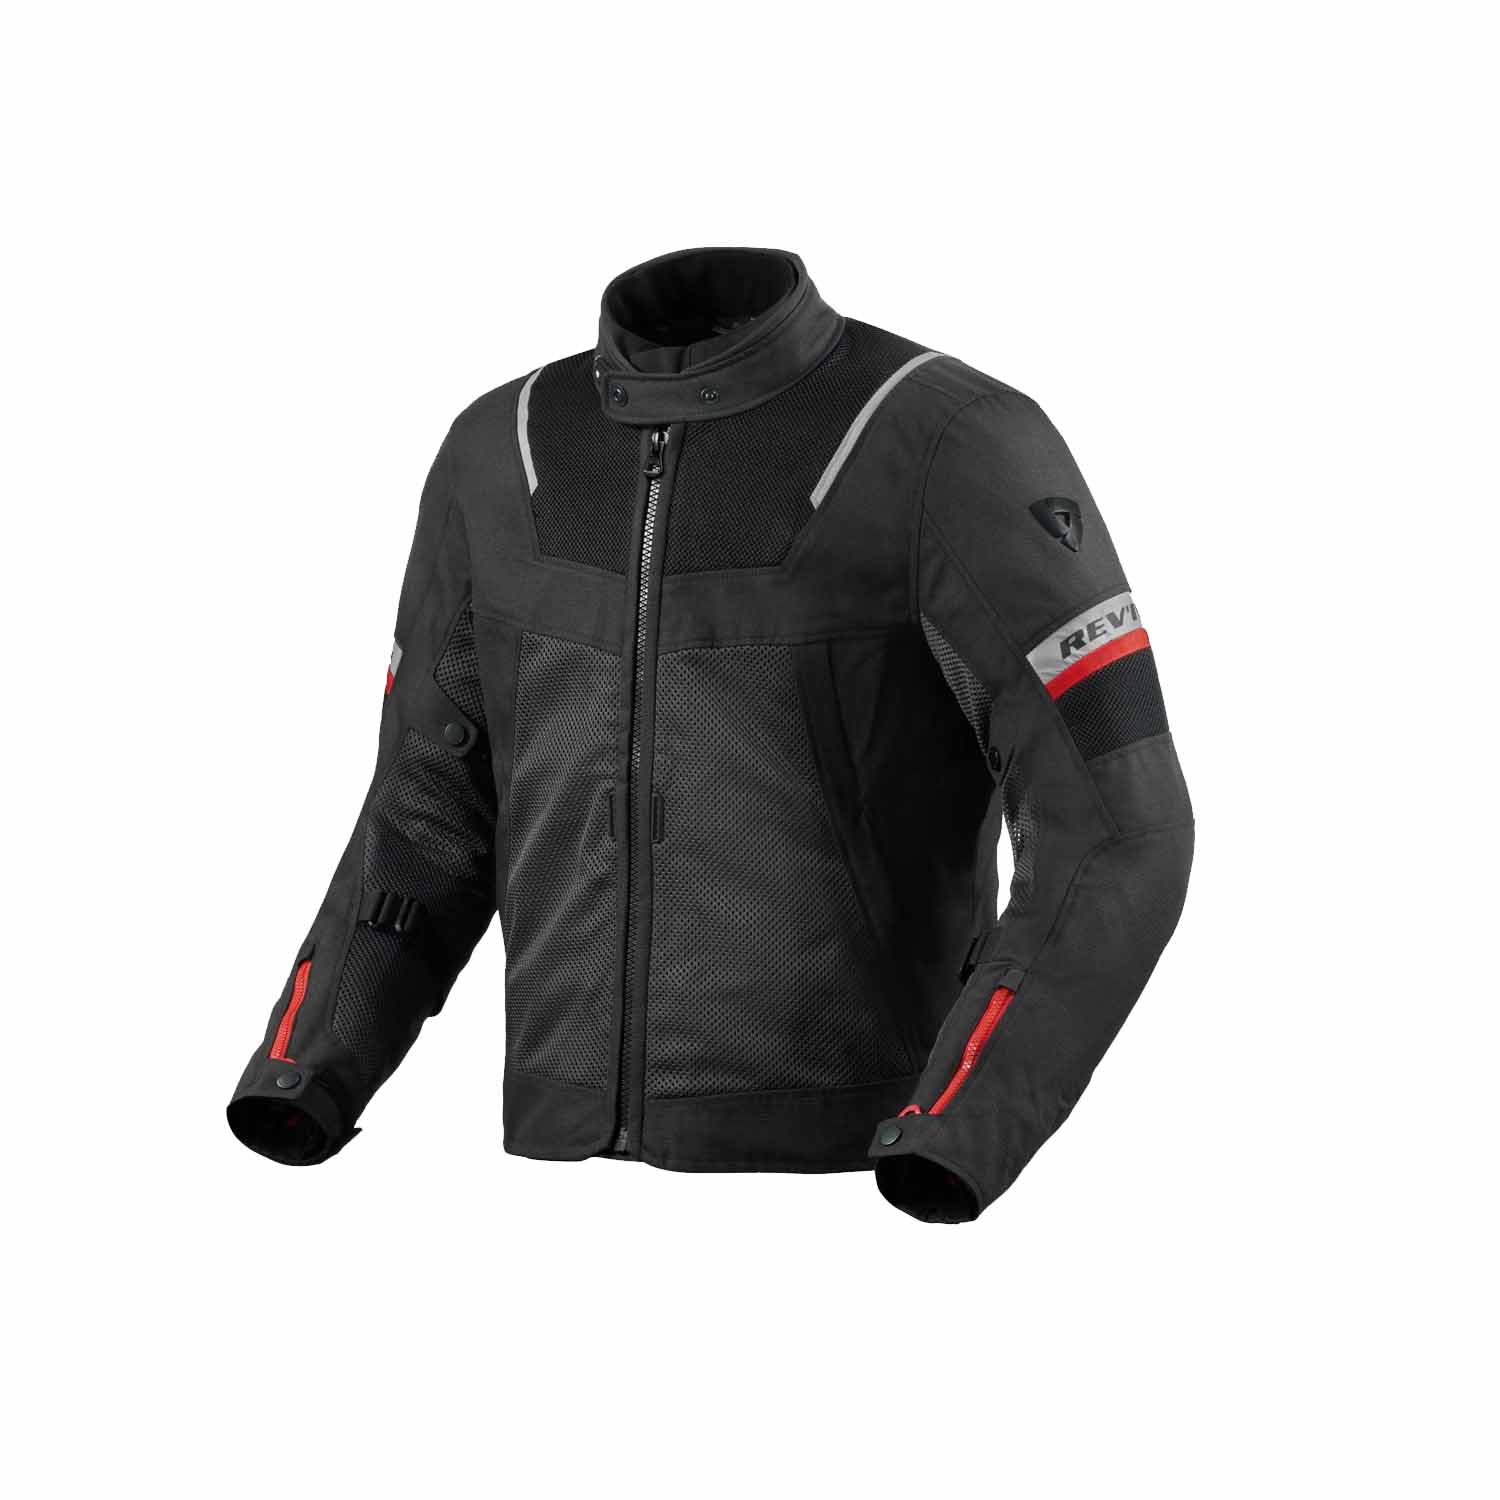 Image of REV'IT! Tornado 4 H2O Jacket Black Anthracite Taille XS